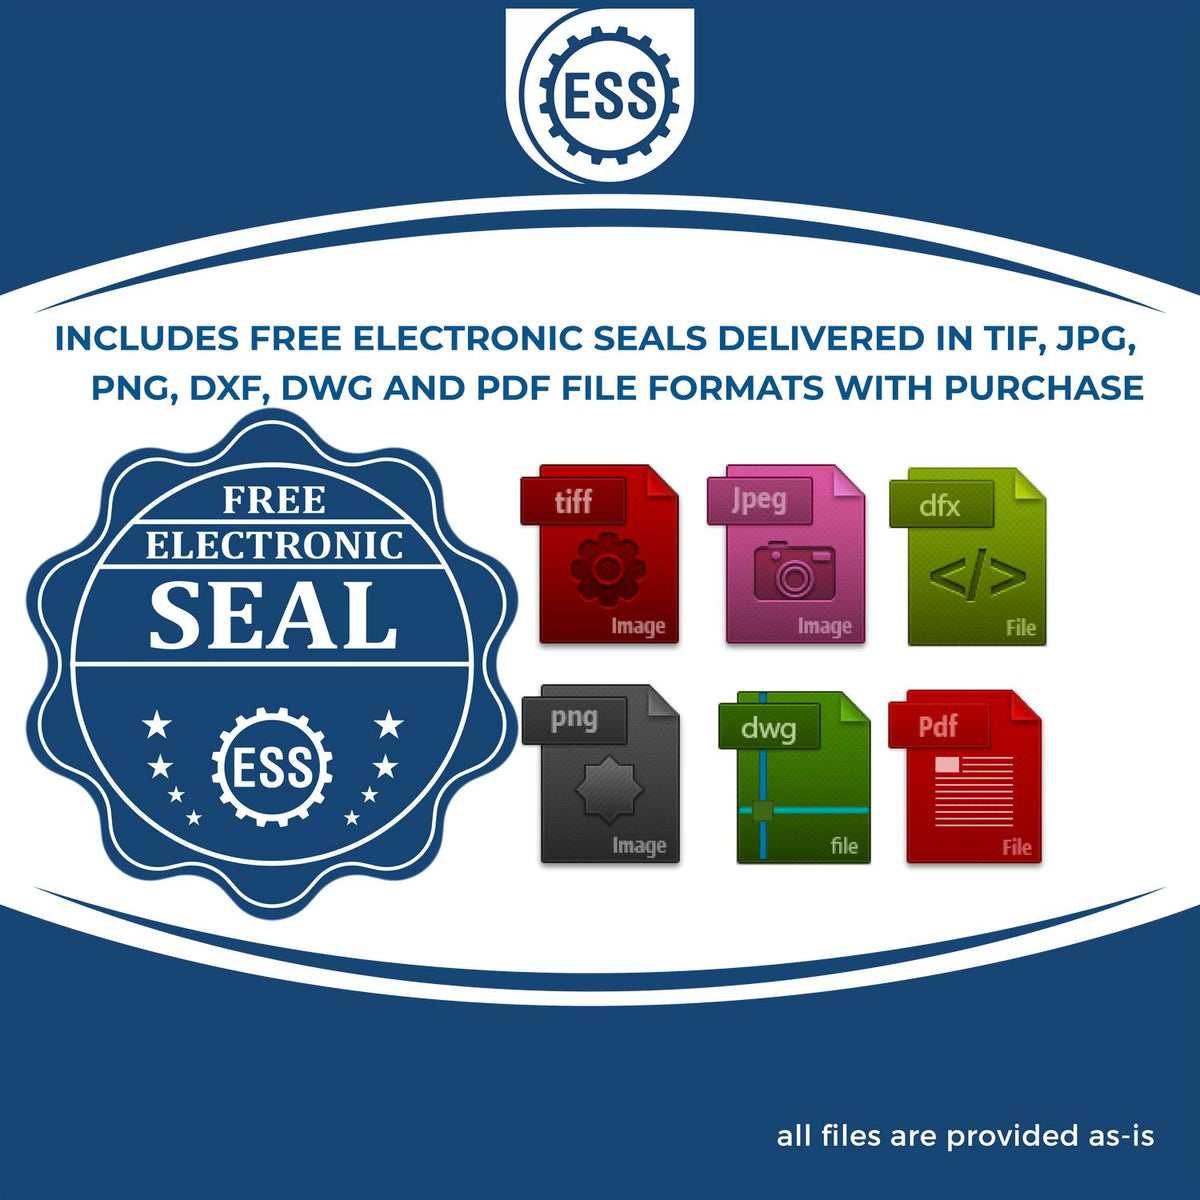 An infographic for the free electronic seal for the New Mexico Engineer Desk Seal illustrating the different file type icons such as DXF, DWG, TIF, JPG and PNG.